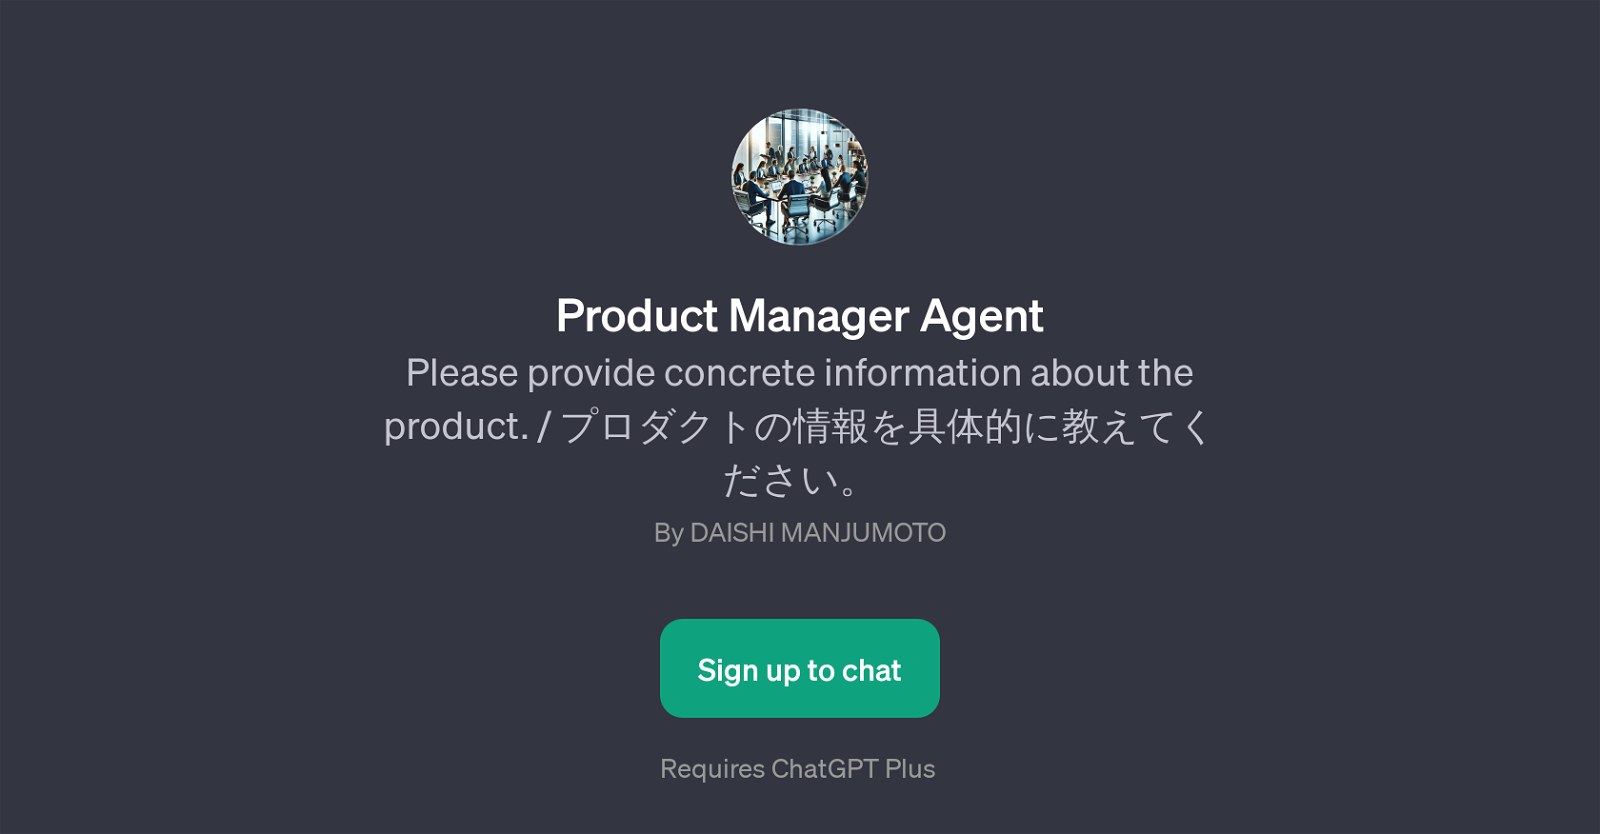 Product Manager Agent website